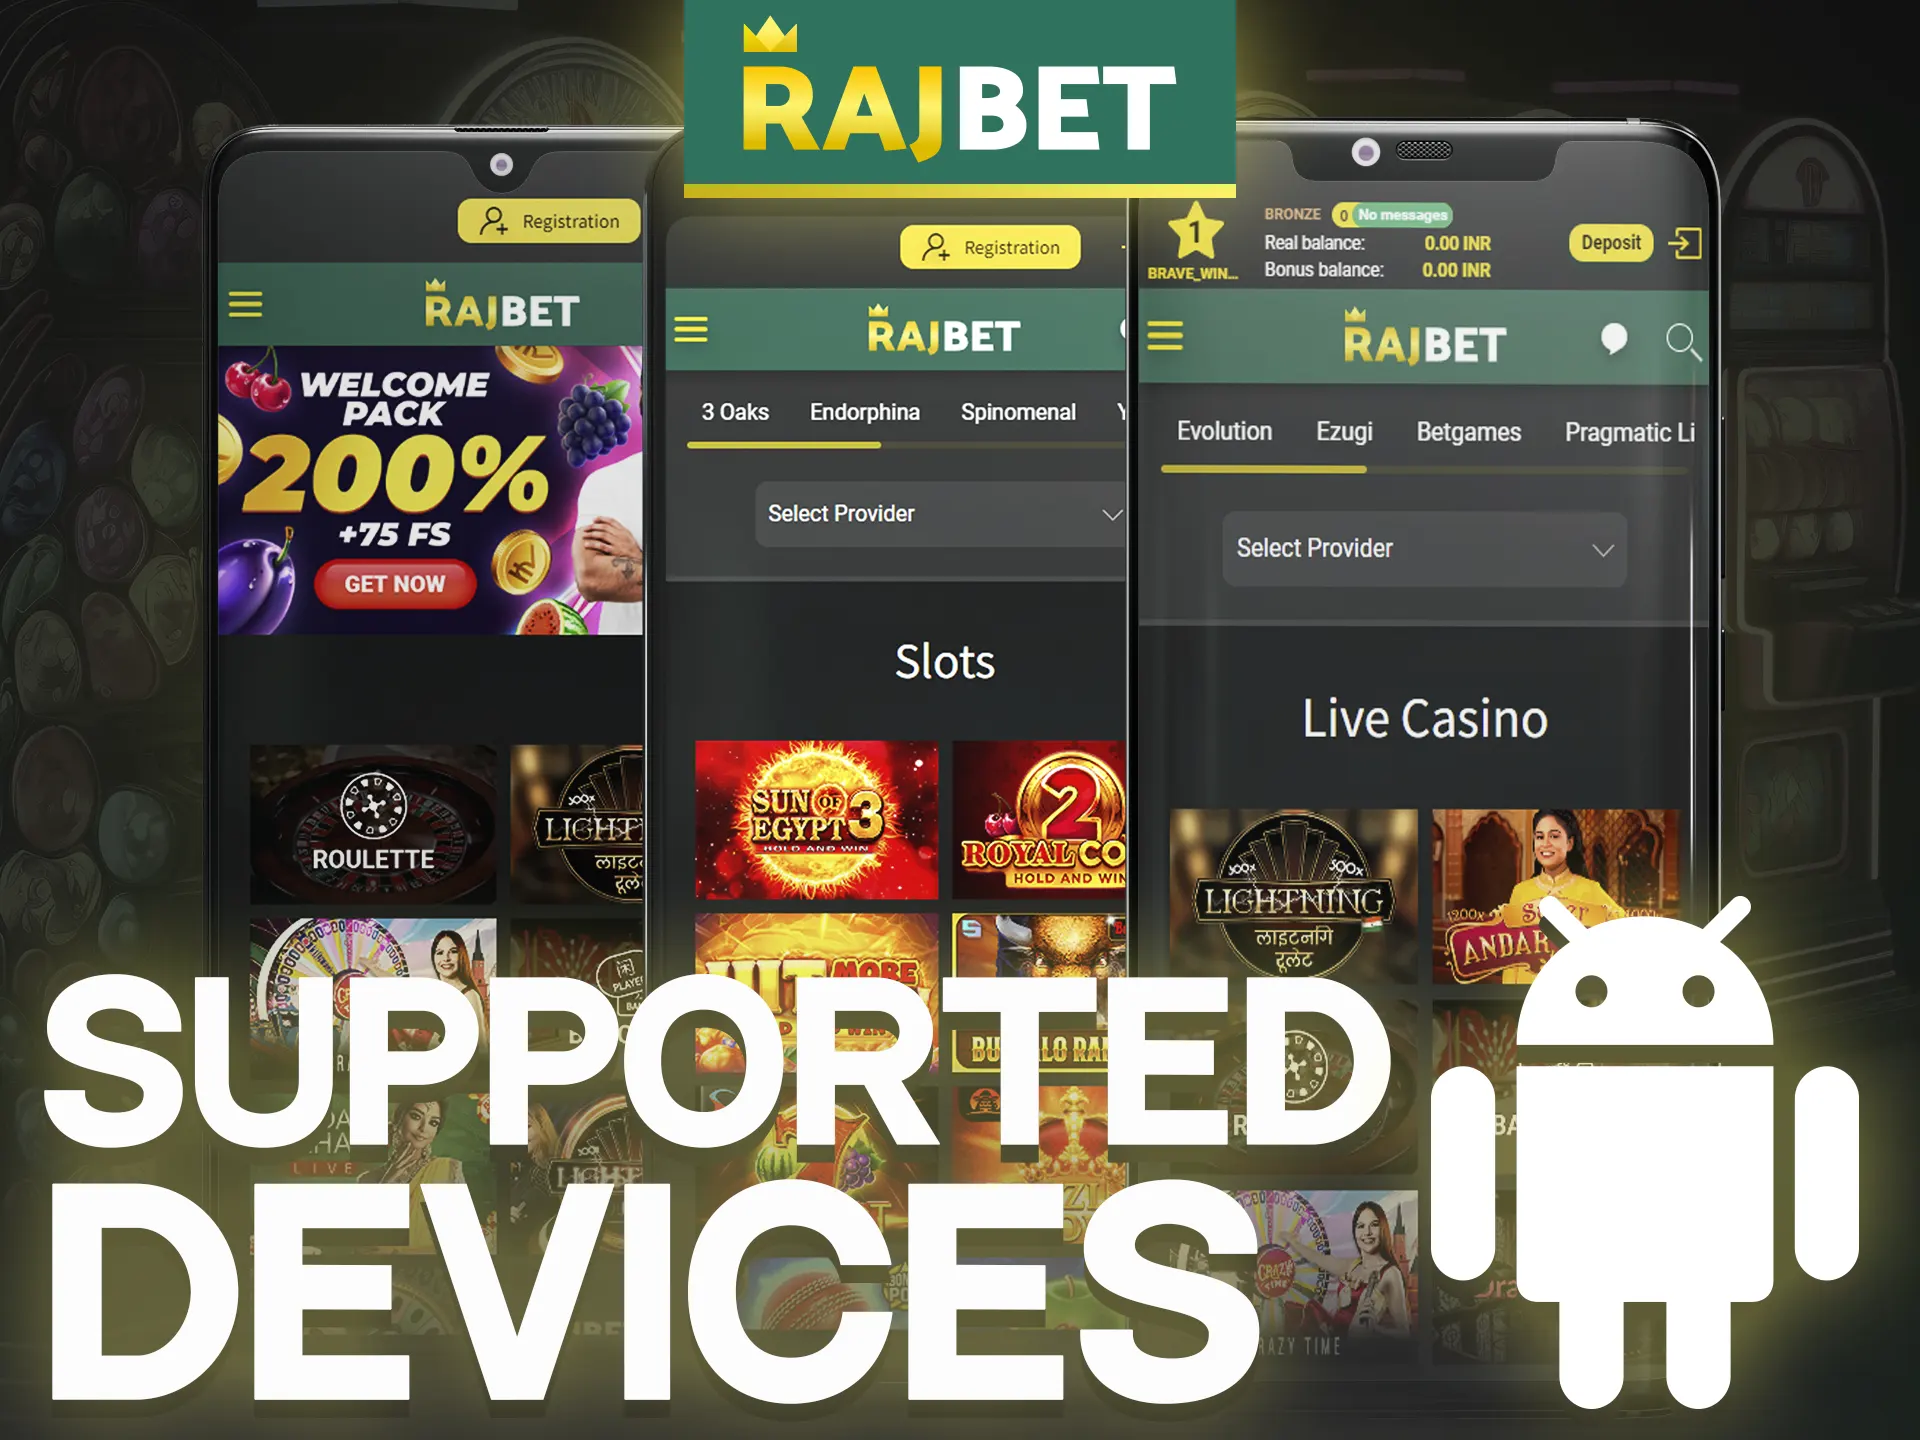 Install the Rajbet mobile app on your Android mobile device.